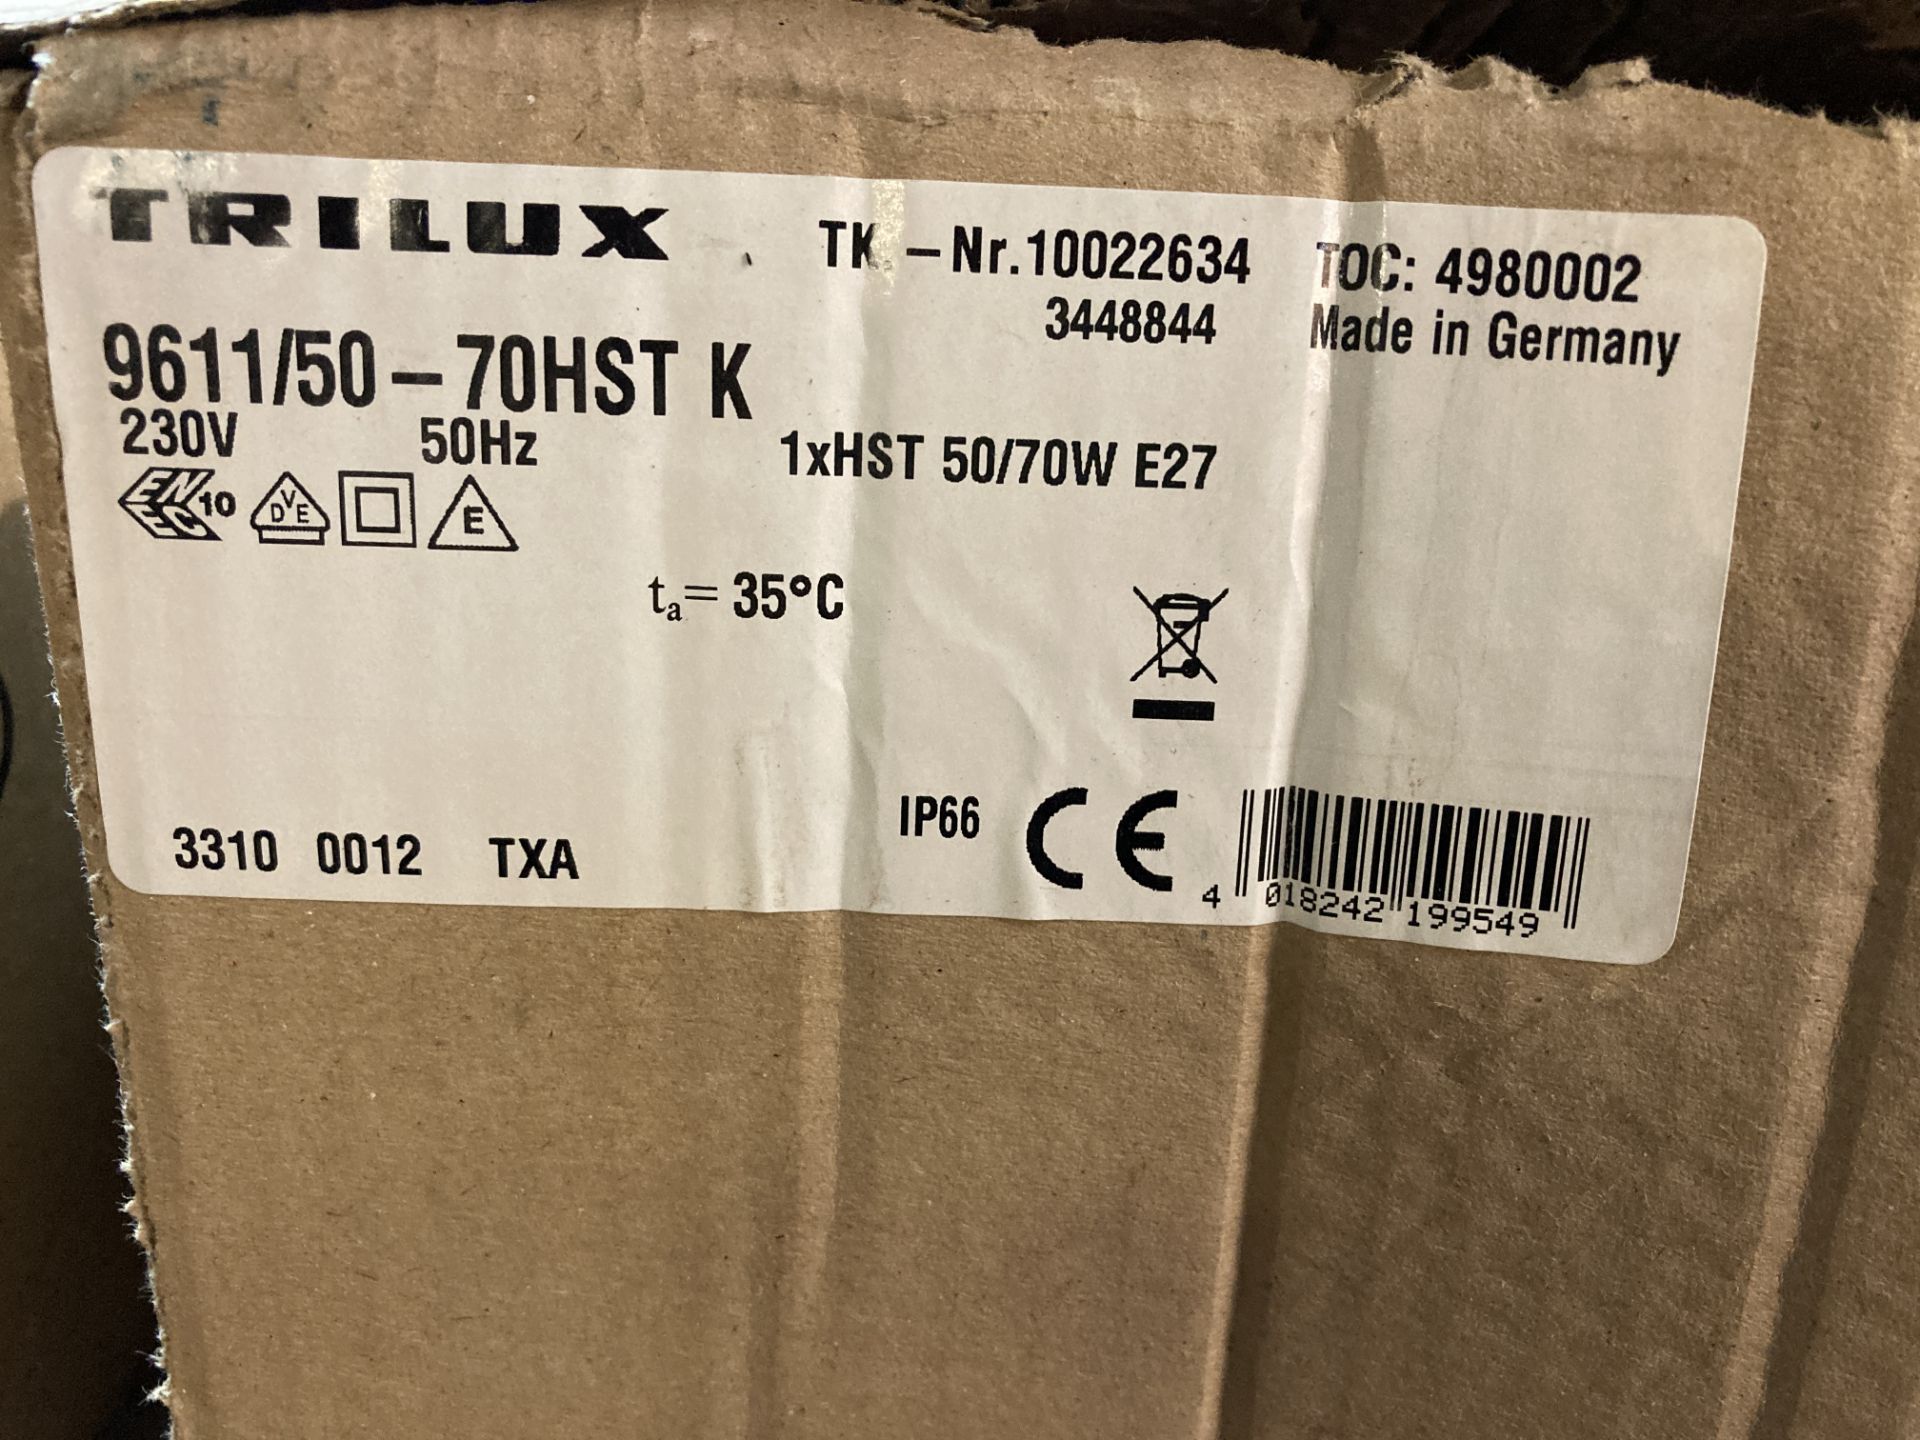 4 x Trilux Lighting 9611/50 70 HST K Street Lamps (NO BULBS) - Image 4 of 5